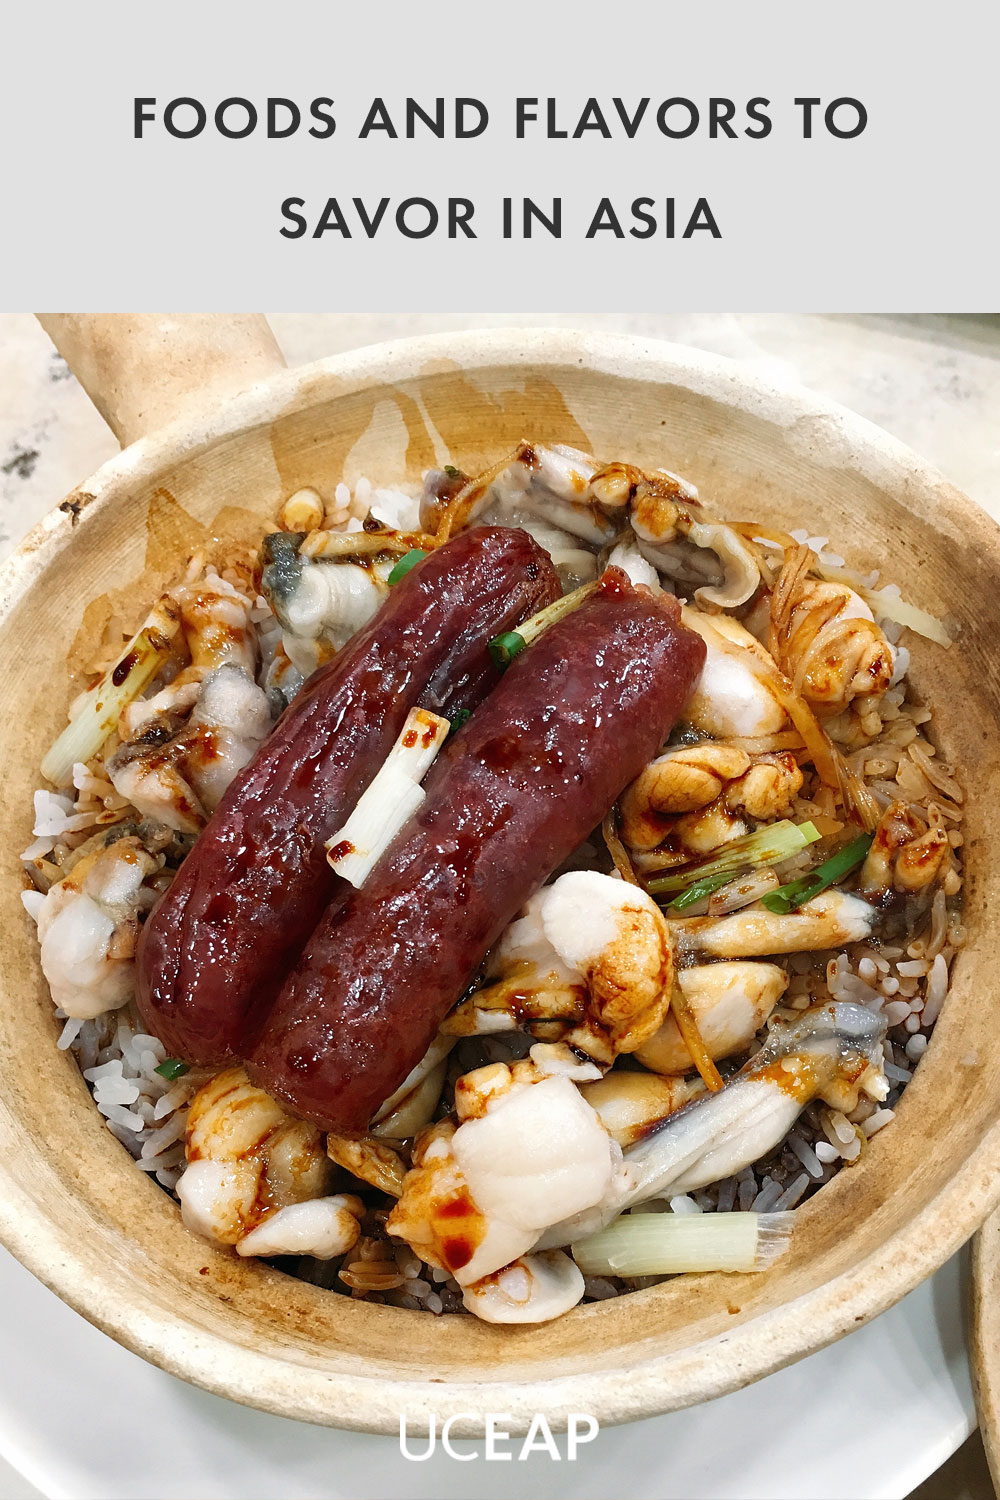 Claypot rice with rice veggies and meat in Hong Kong.